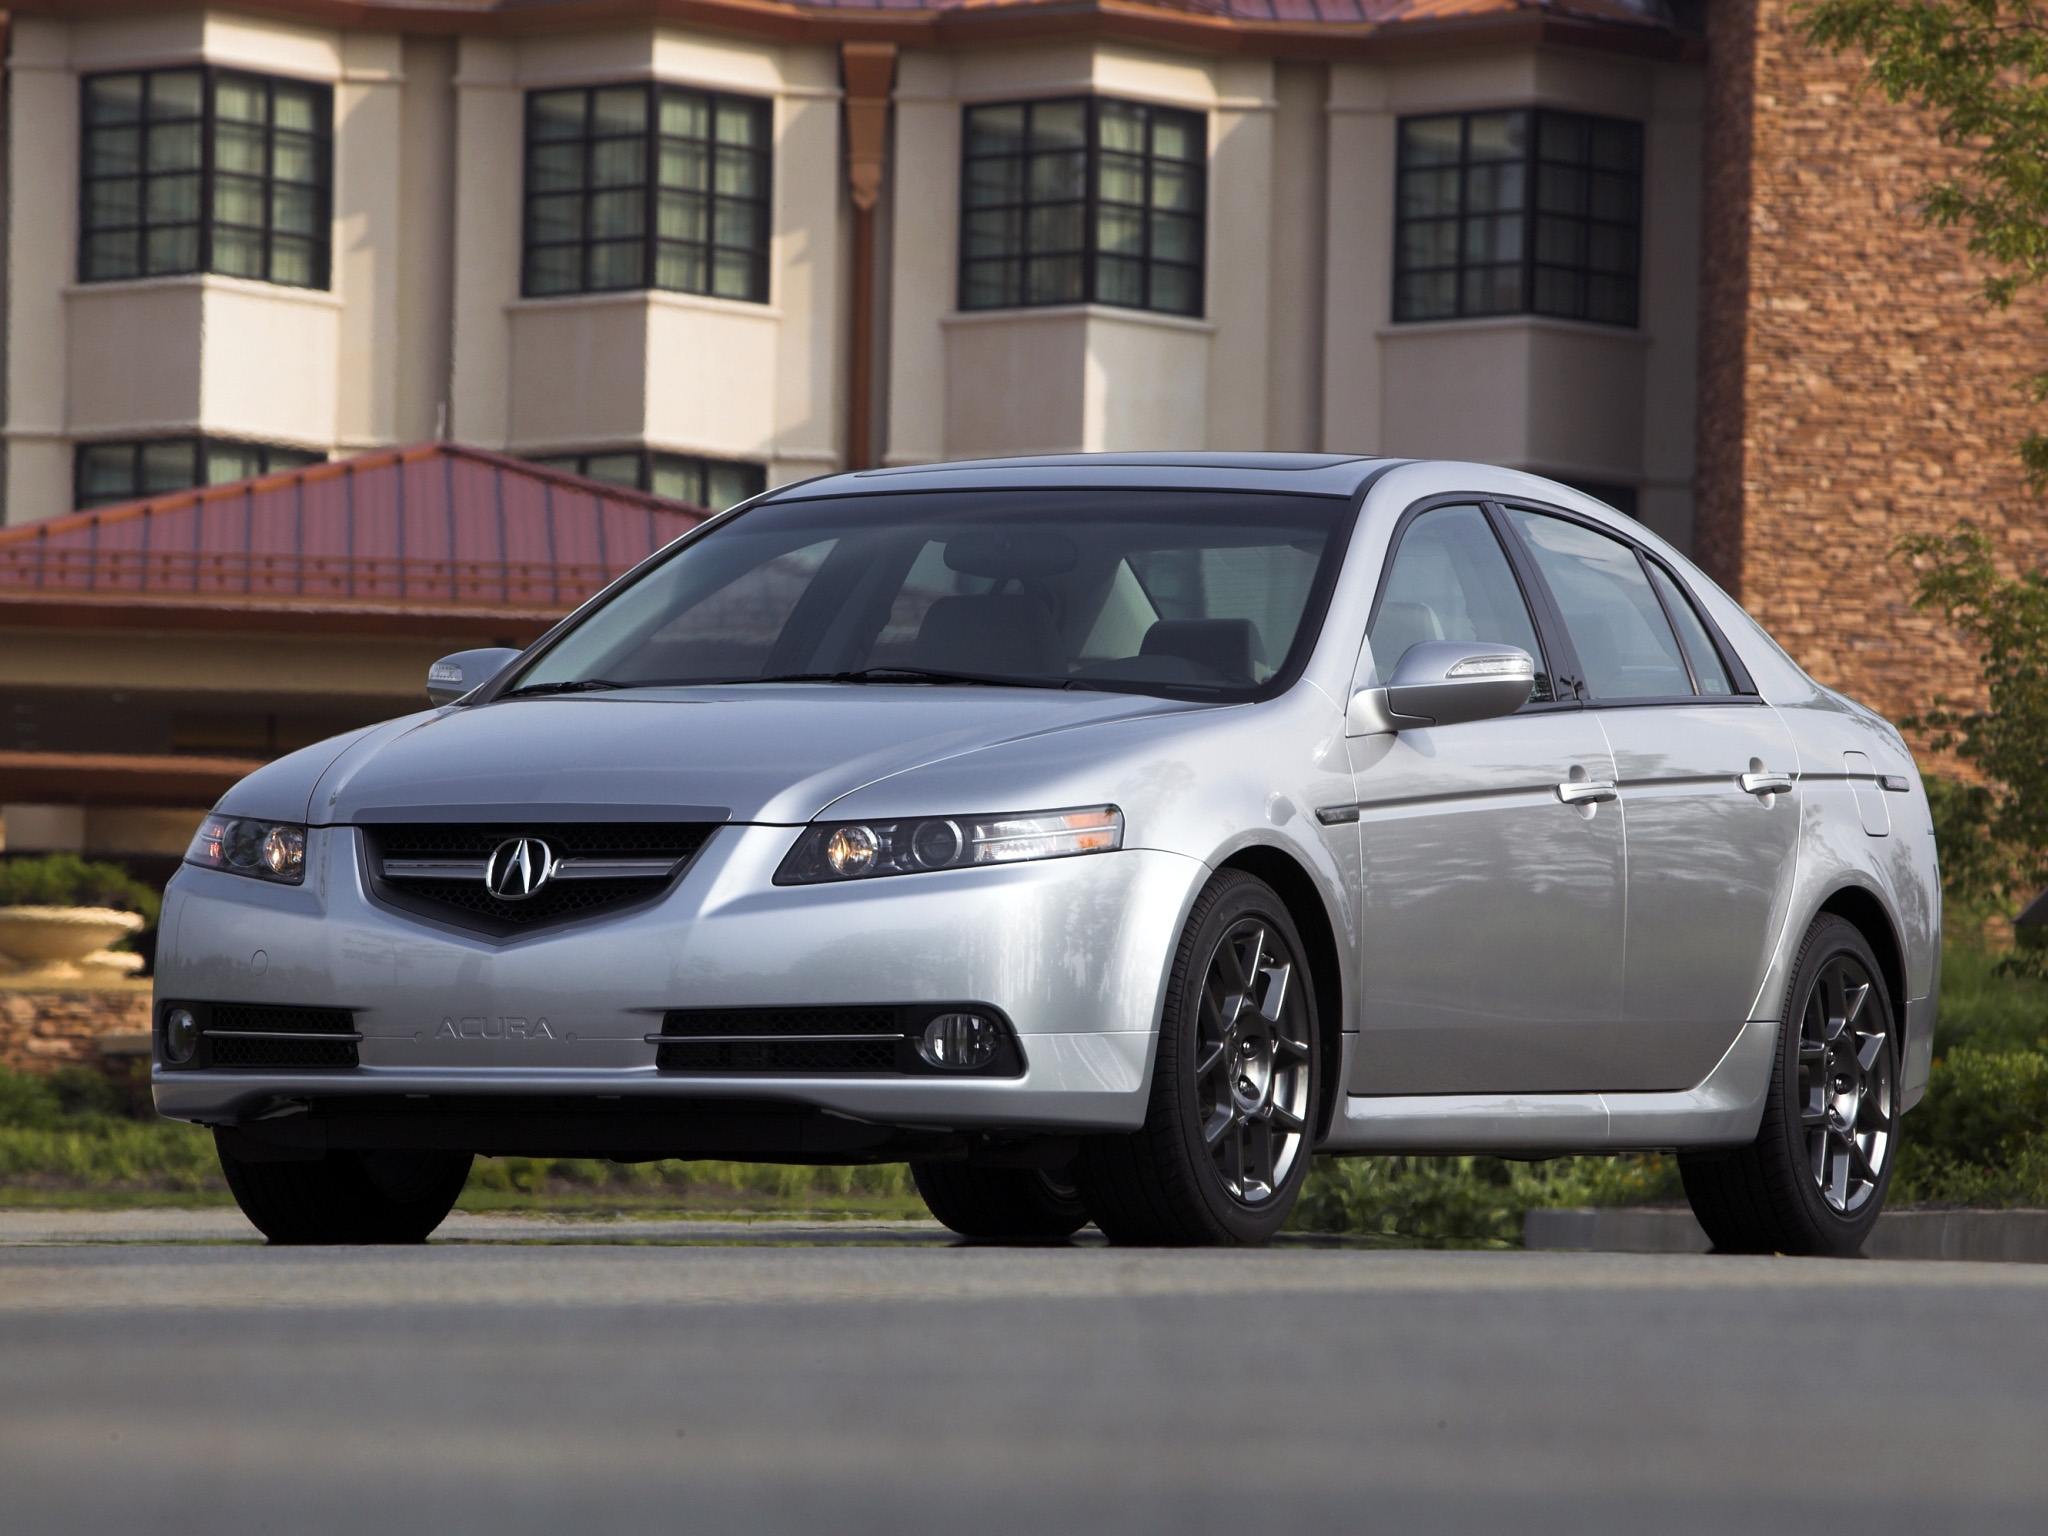 front view, auto, grass, acura, cars, building, style, tl, 2007, silver metallic